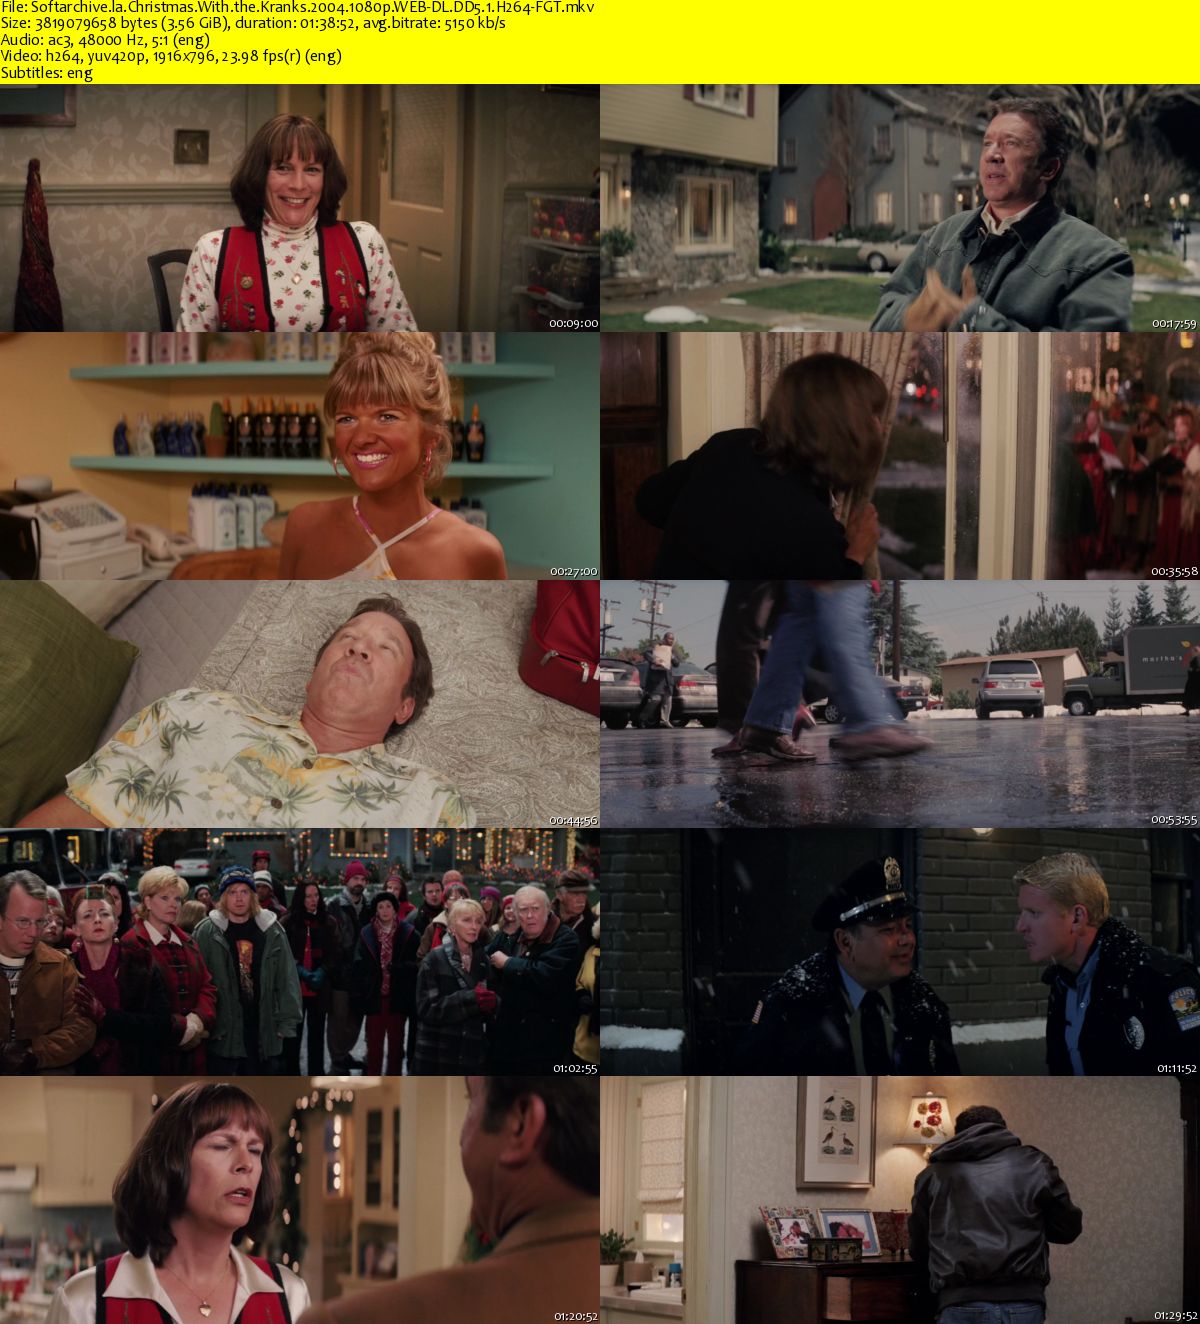 Christmas With the Kranks 2004 1080p WEB-DL DD5.1 H264-FGT.